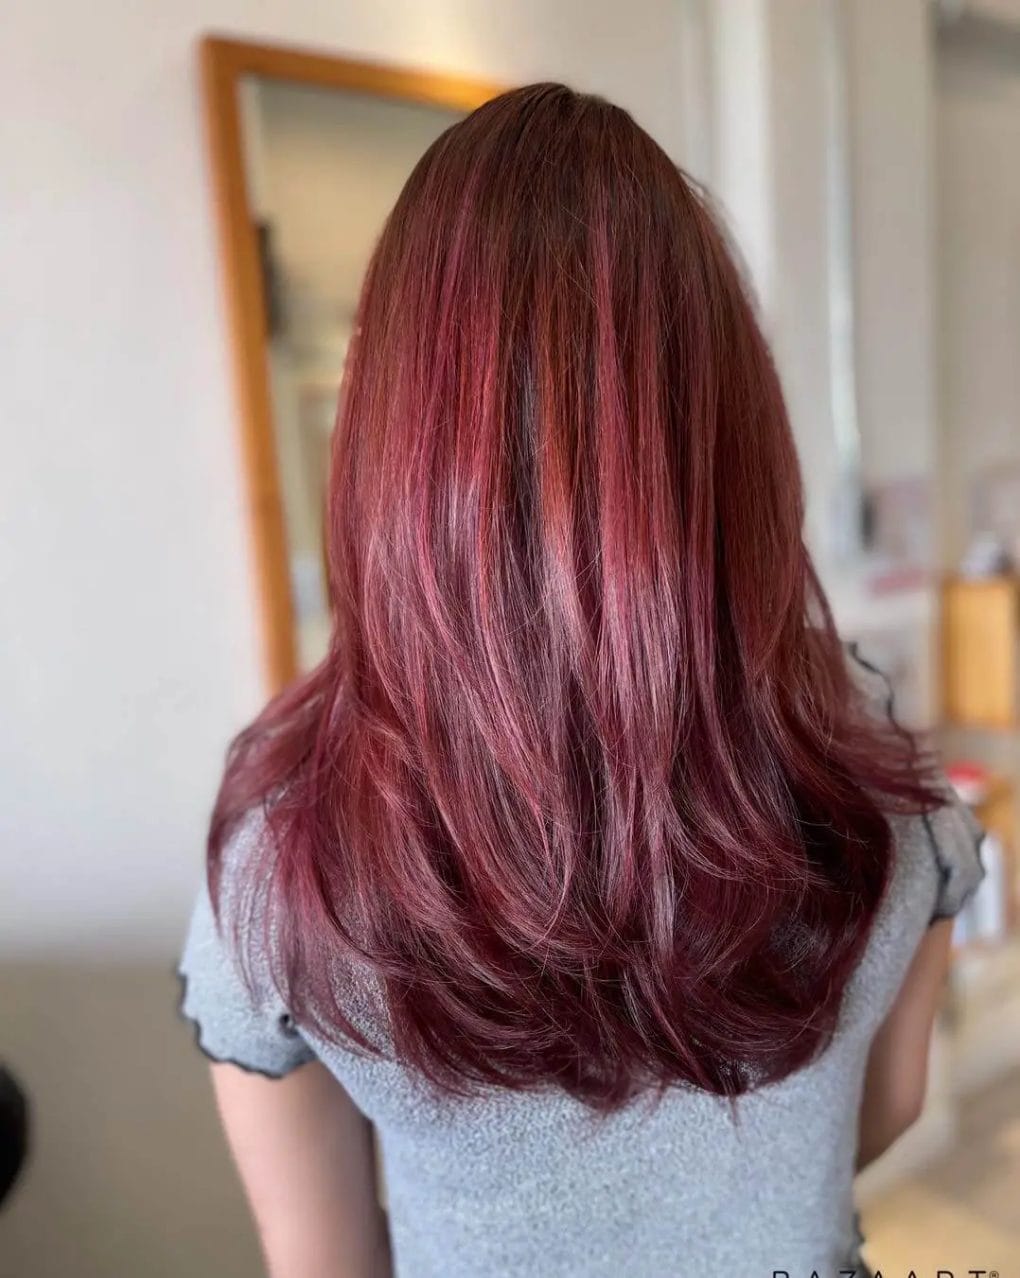 Berry-like red balayage on deep brunette with graceful layers.